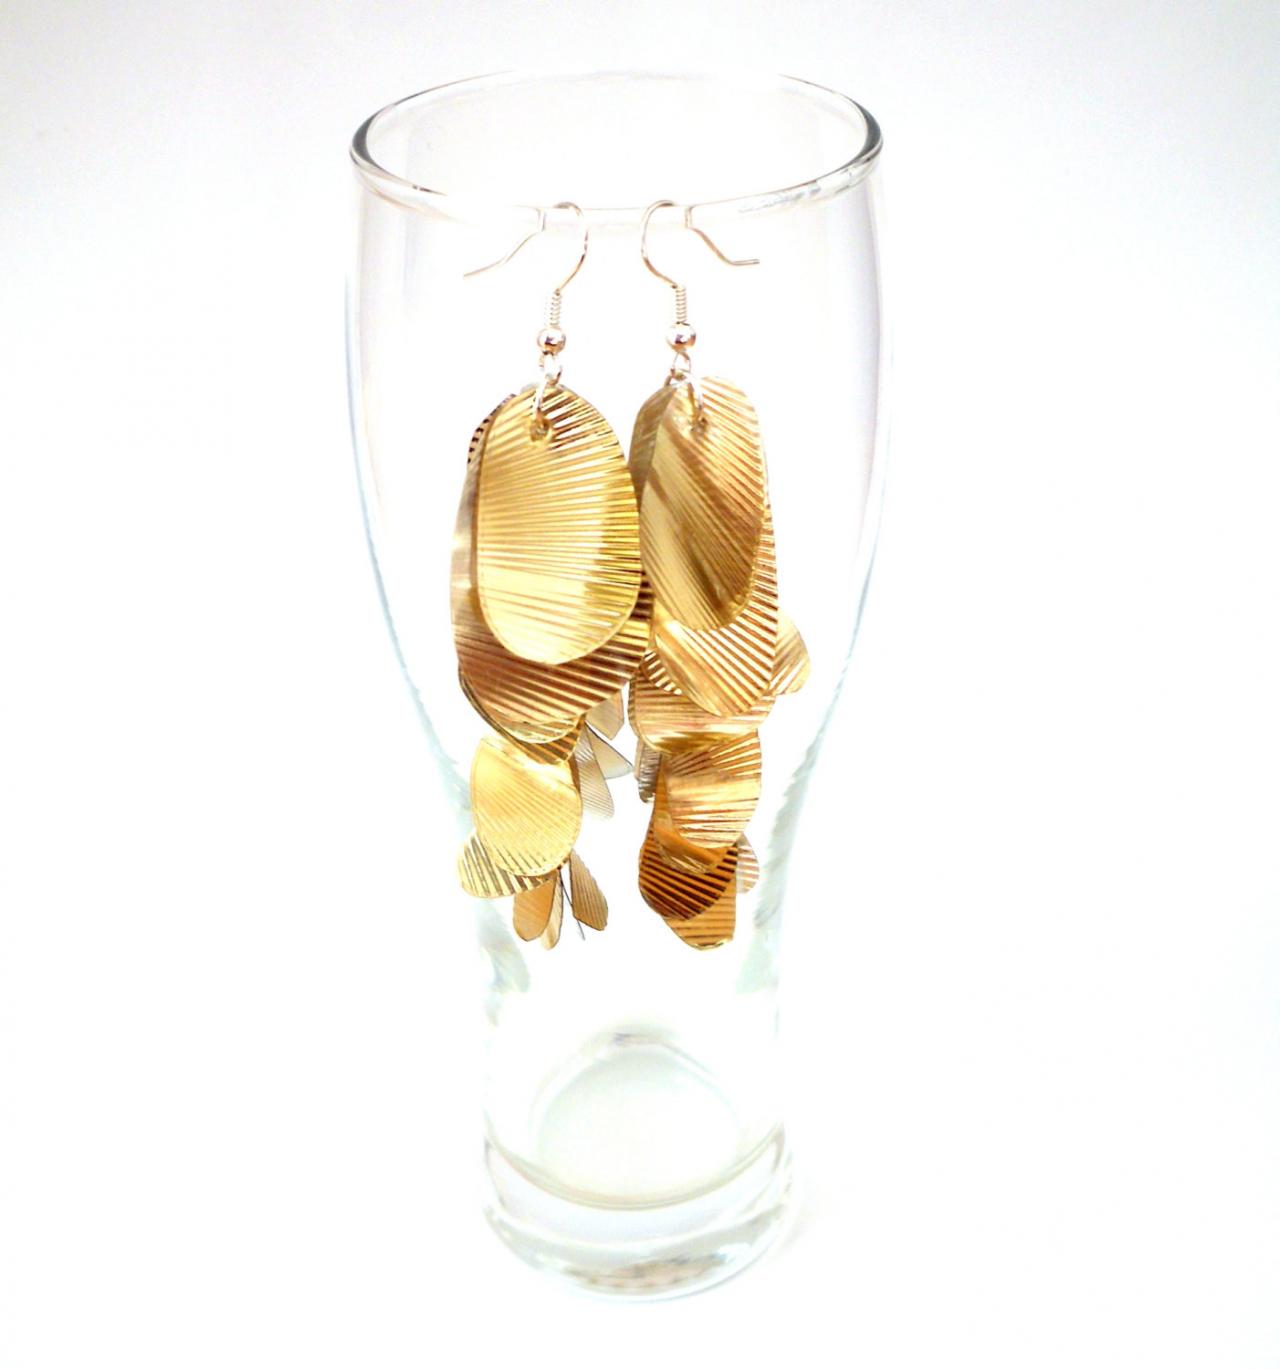 Long Gold Earrings Upcycled Jewellery Very Long Earrings Repurposed Plastic Box Sustainable Ecofriendly Recycled Jewelry